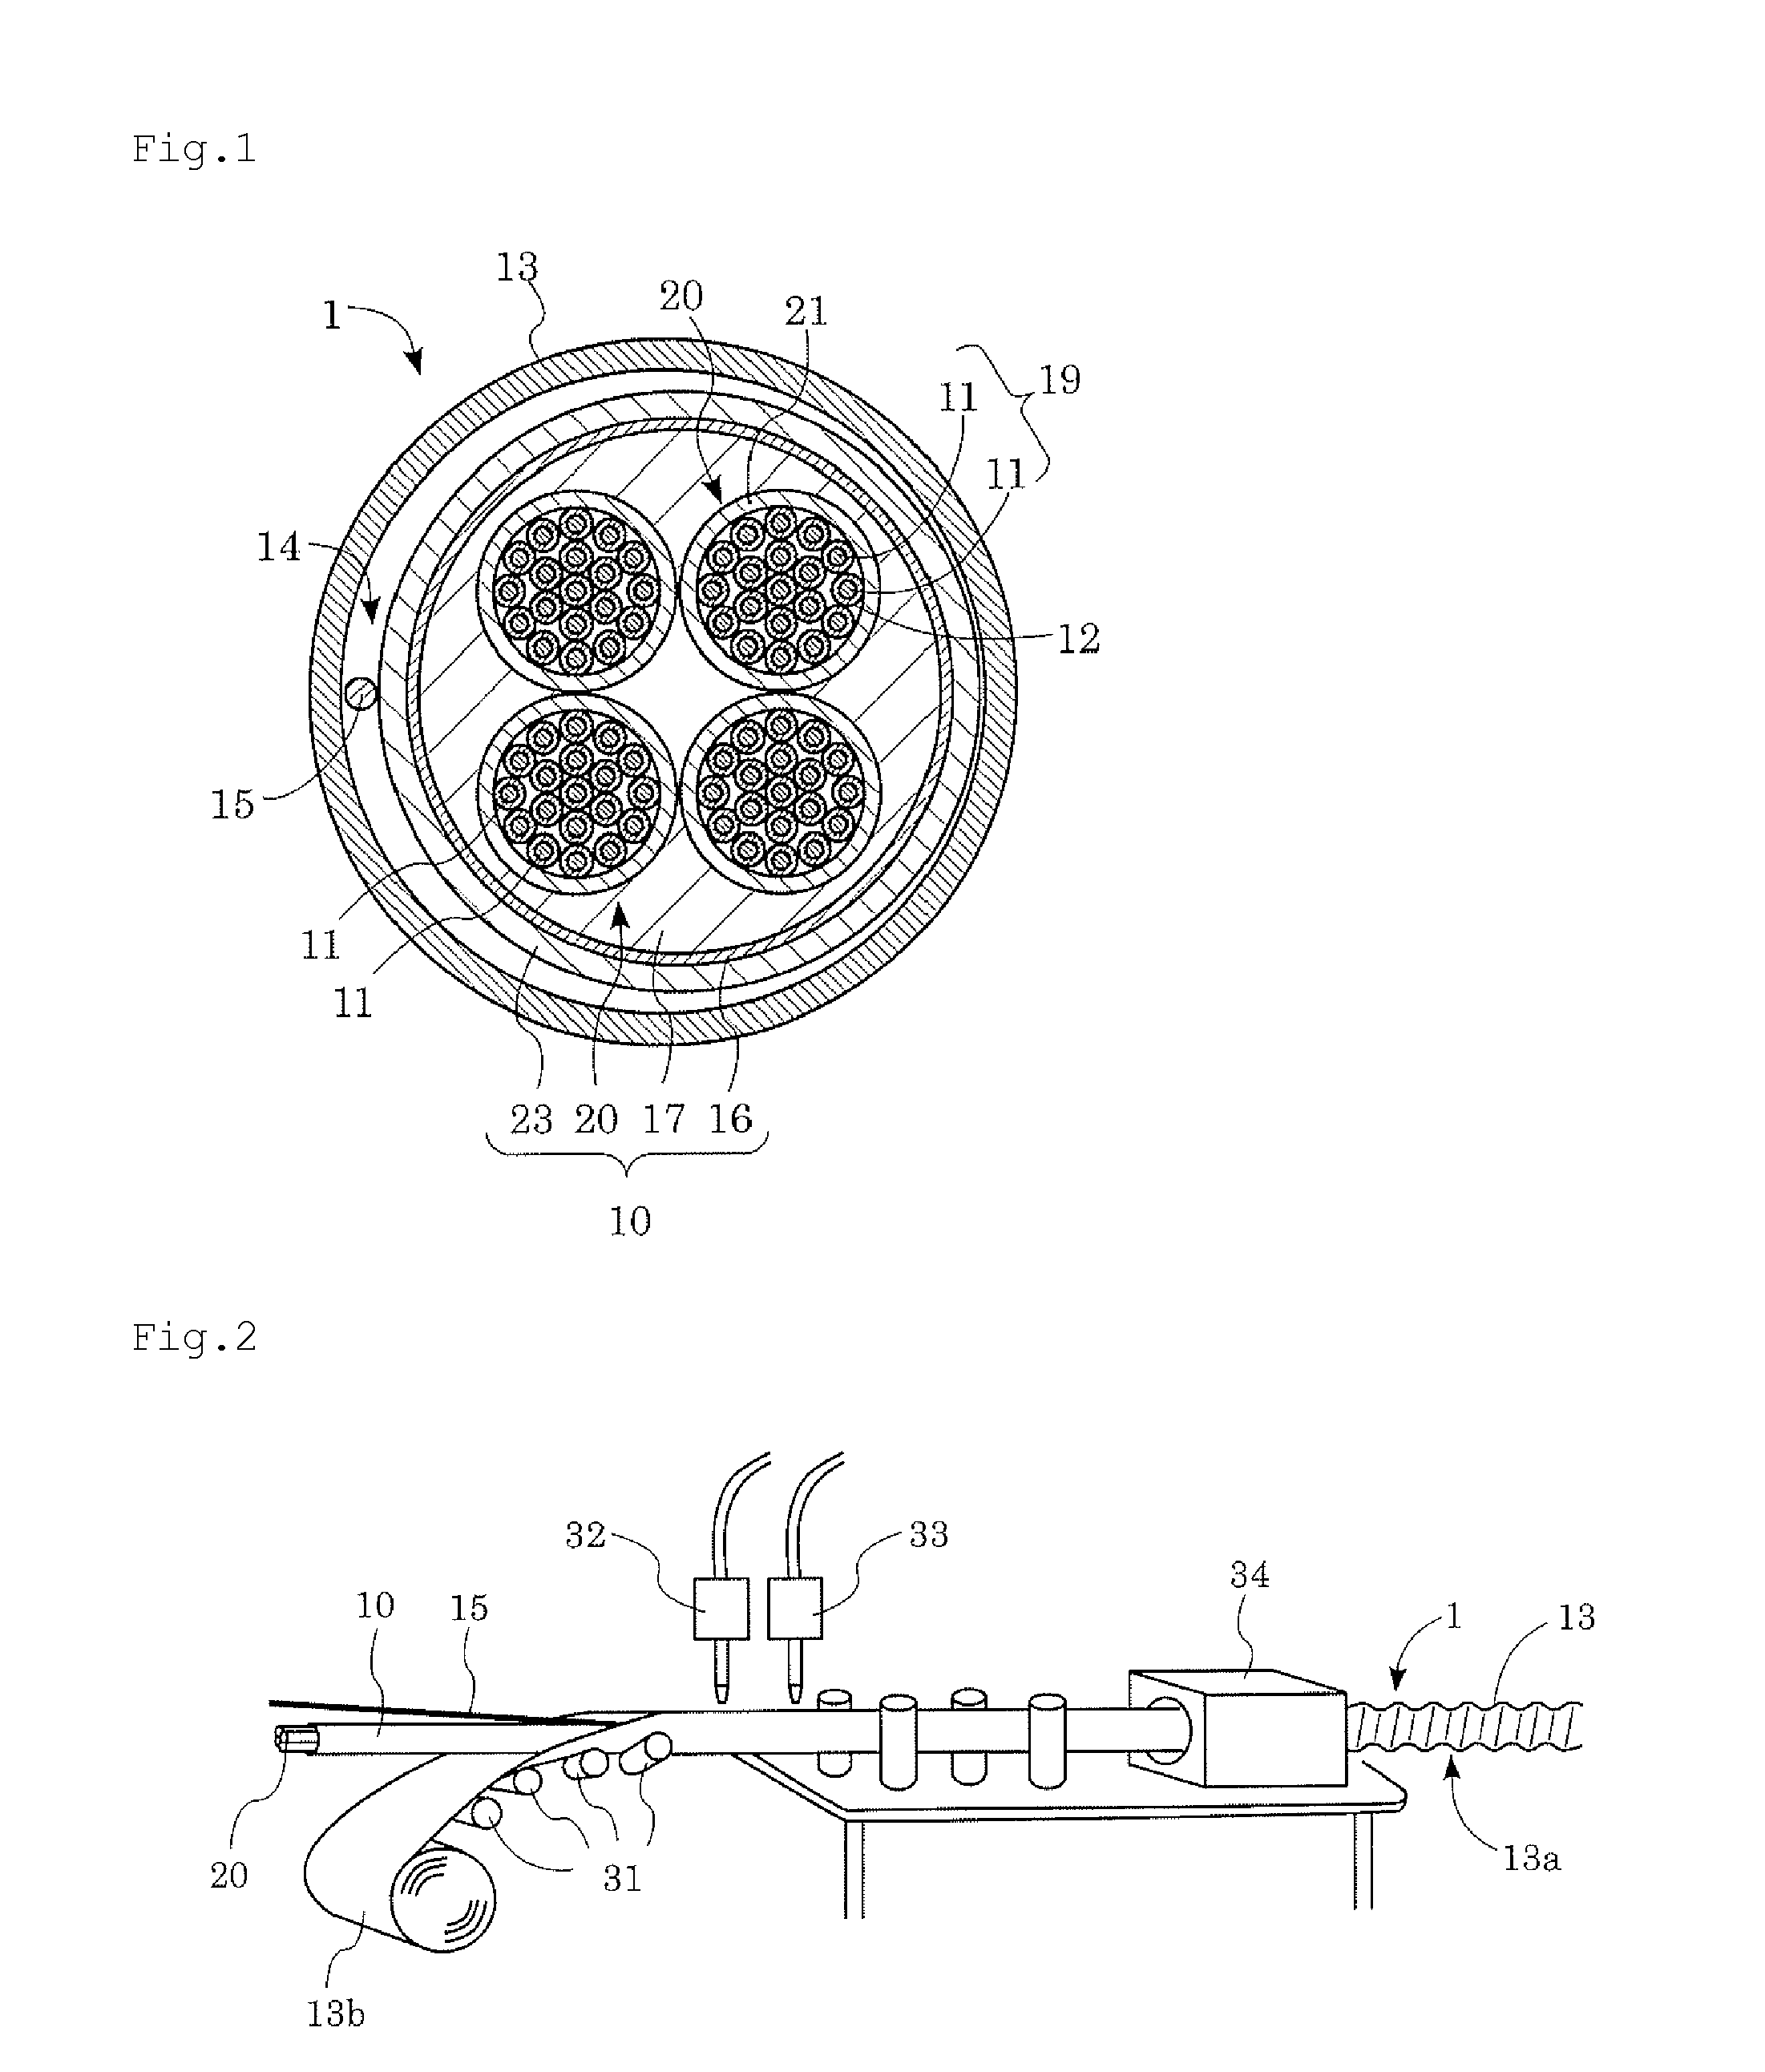 Power supply wire for high-frequency current